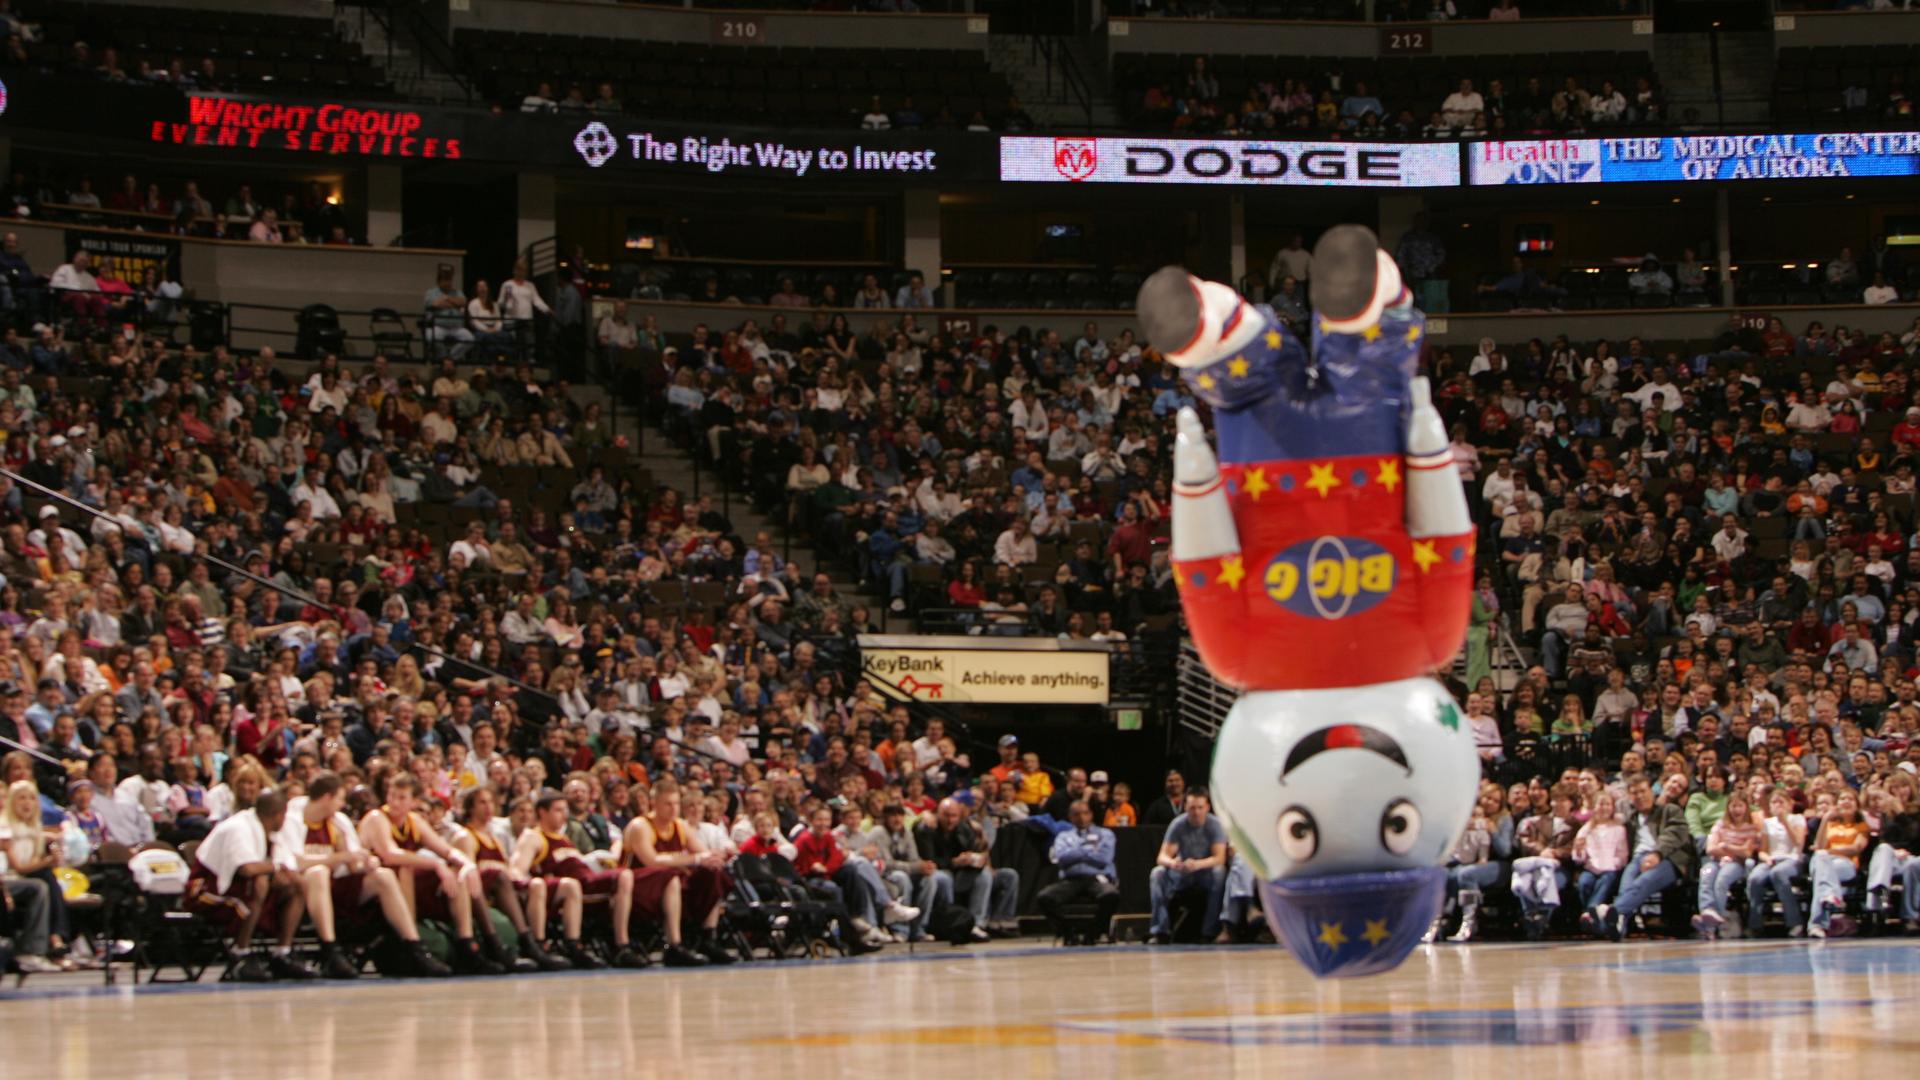 The company "Signs and Shapes" in Omaha builds inflatable mascots for professional sports teams, built to entertain and withstand a beating. "Globie" is the mascot for the Harlem Globetrotters. 